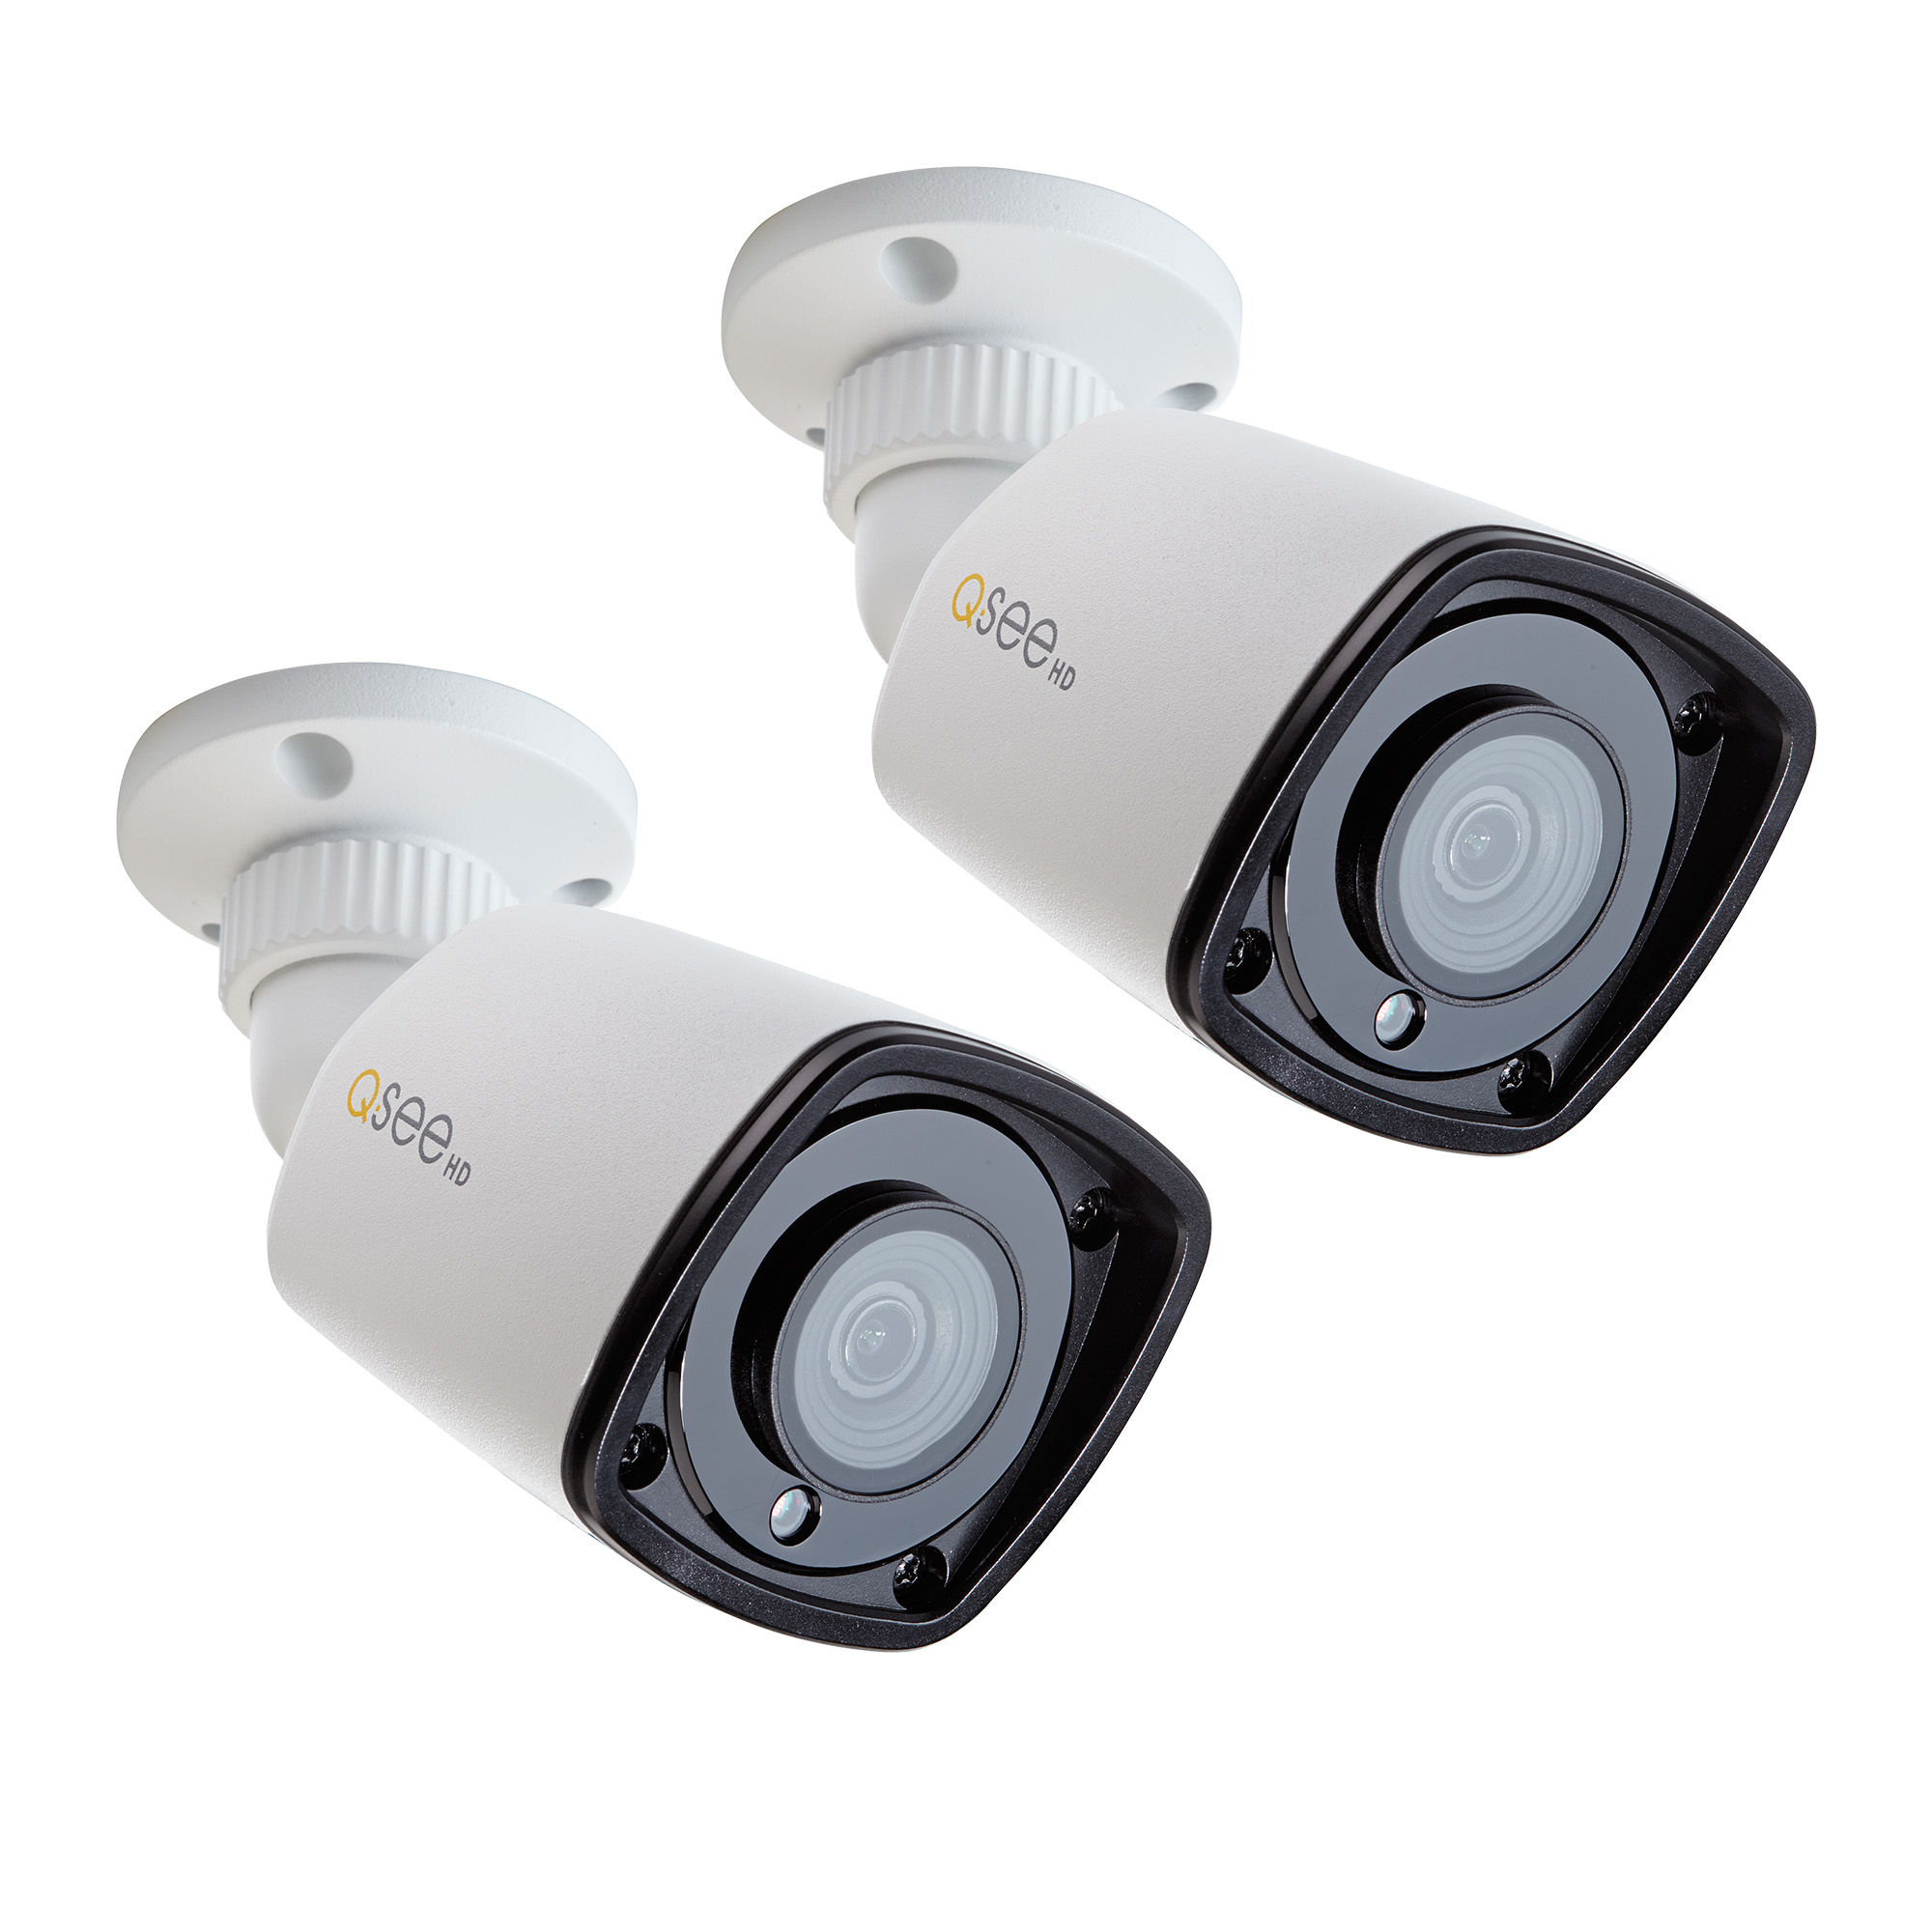 Q-See 5MP H.265 IP Bullet Camera 2 Pack with Color Night Vision - image 1 of 5